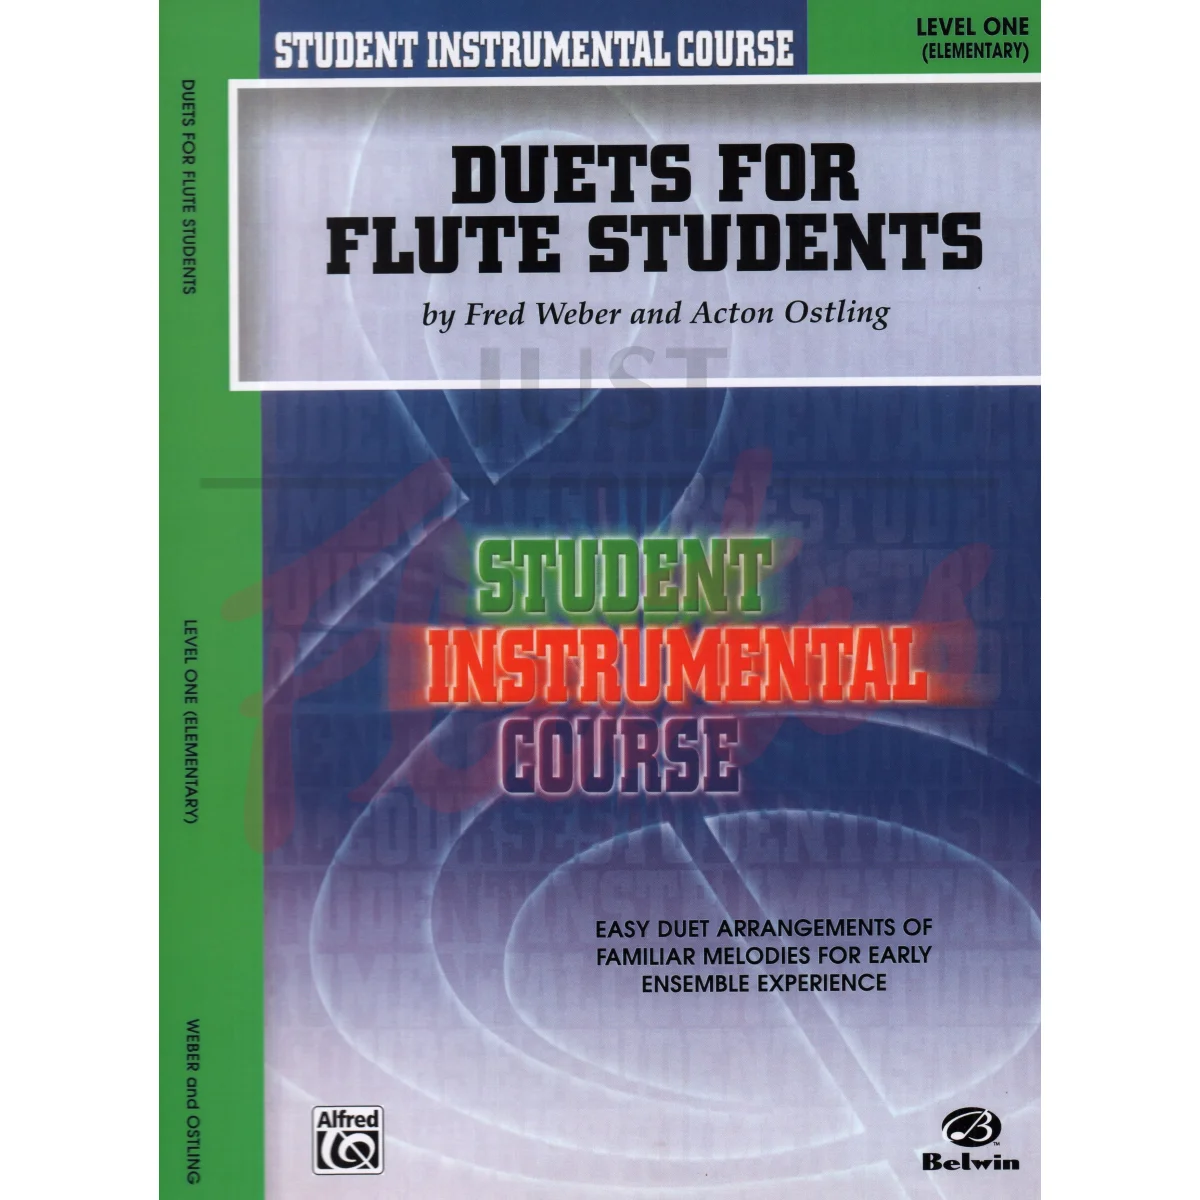 Duets for Flute Students Level One